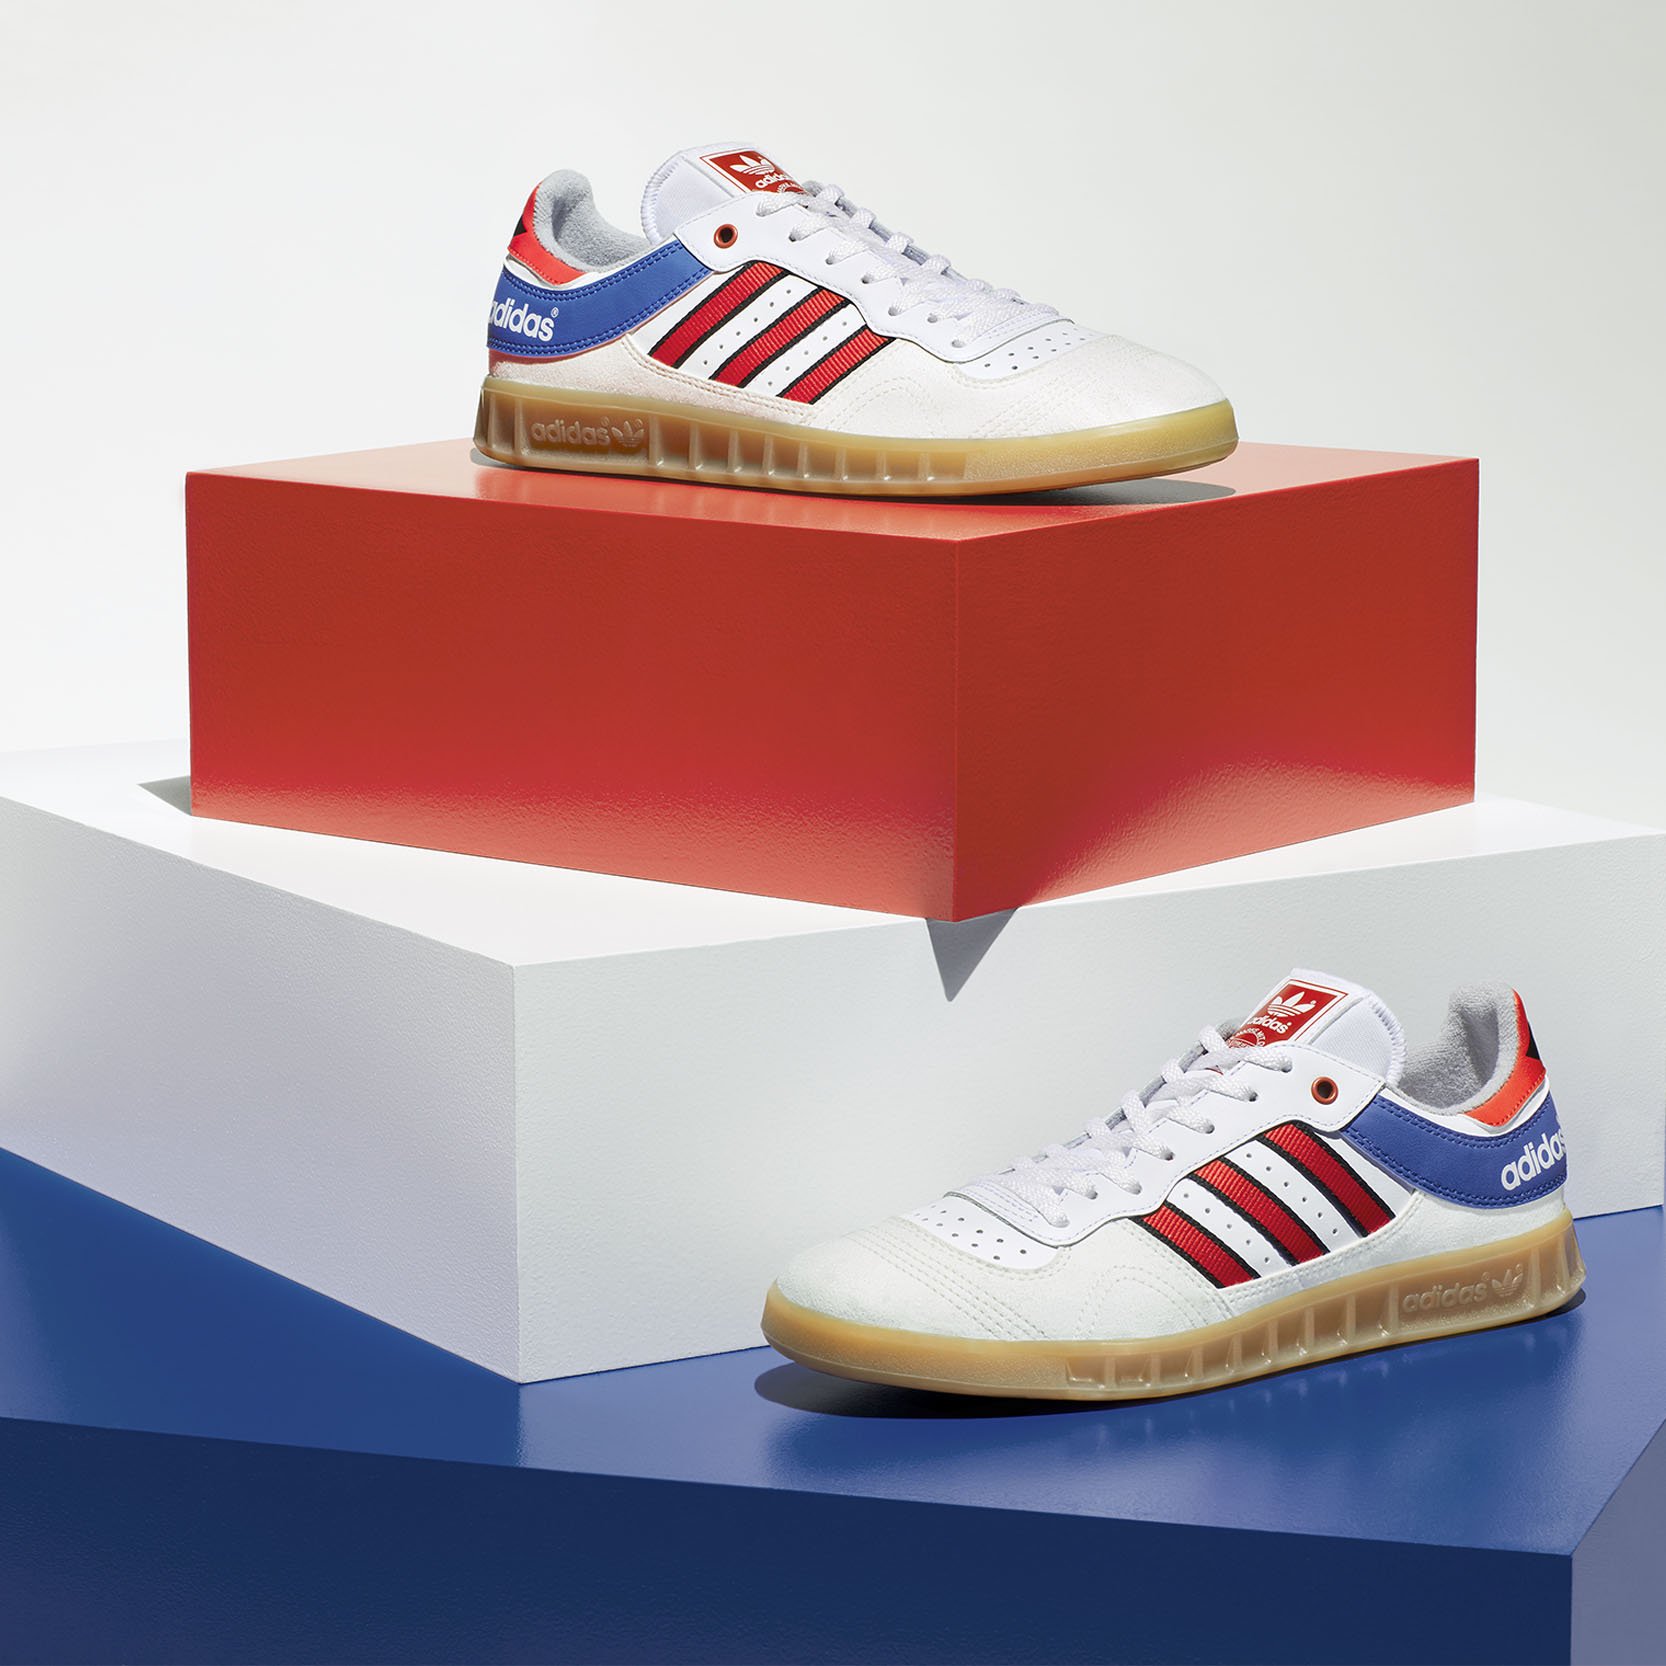 adidas Originals on Twitter: "An authentic 1:1 reissue of vintage 1987 release, Handball Top OG in stores this month. Available now at https://t.co/C8ZmDqzYYA" / Twitter